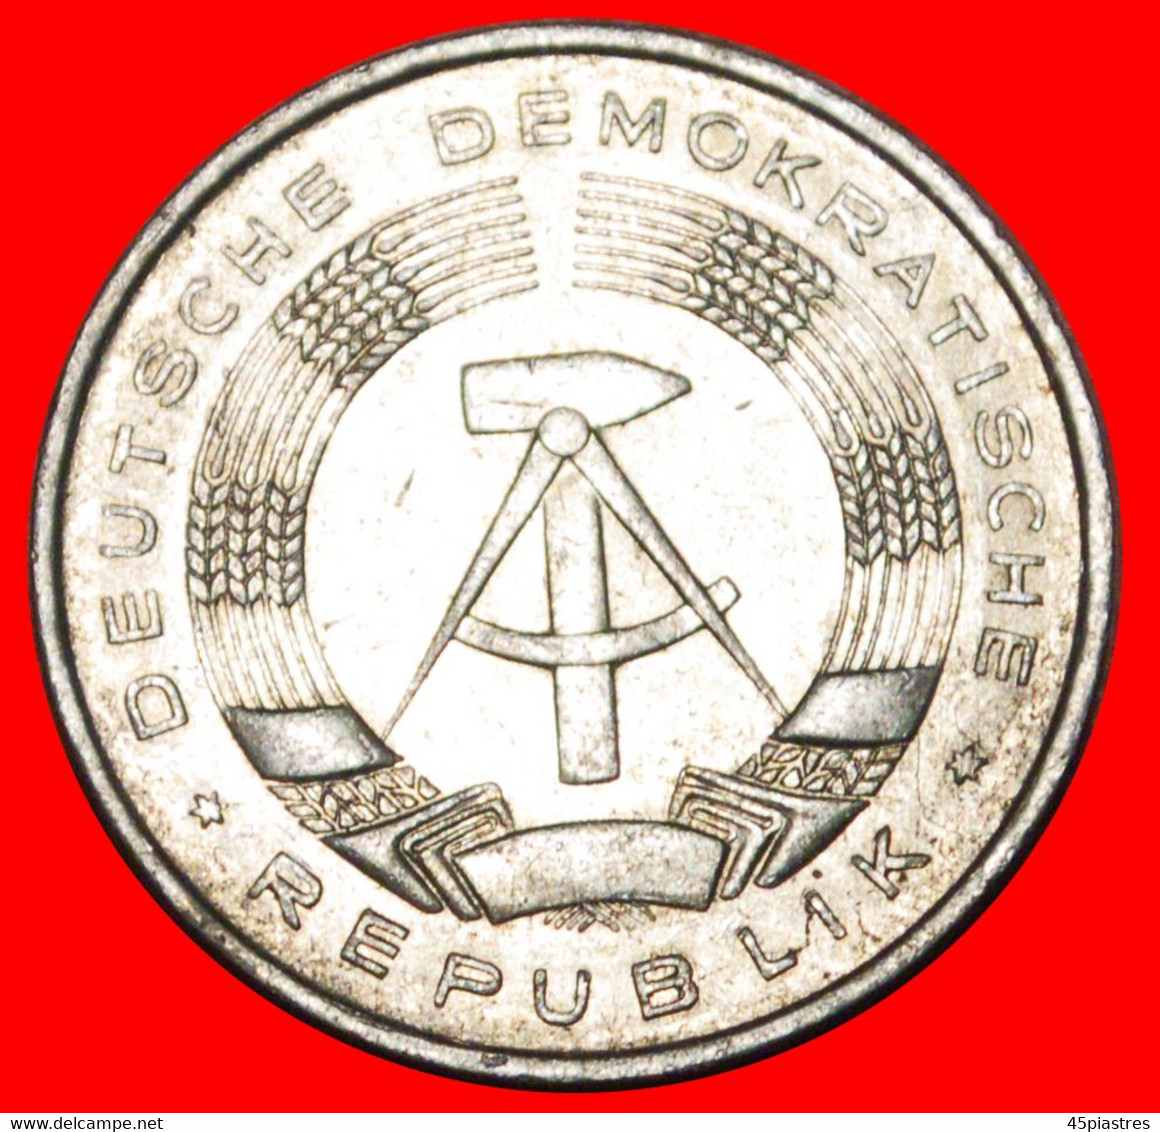 * DEUTSCHE MARK (1956-1963)★ GERMANY ★ 1 MARK 1963A! DISCOVERY COIN! LOW START ★ NO RESERVE! - 1 Mark